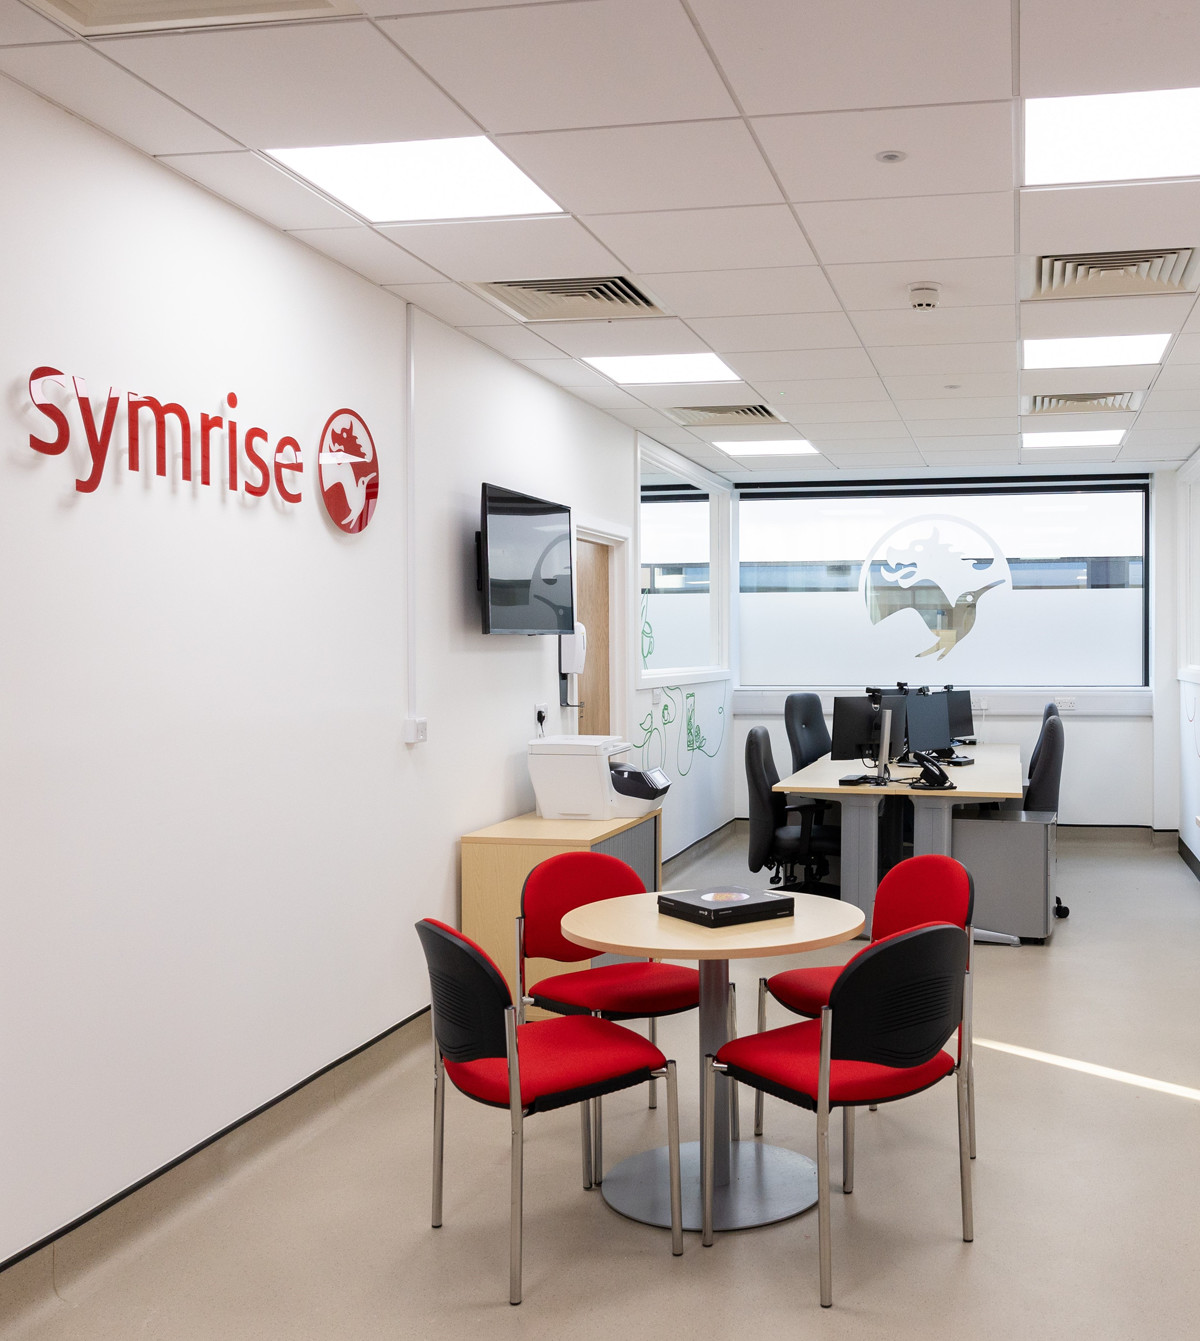 Symrise opens innovation lab located at Colworth Science Park in the UK